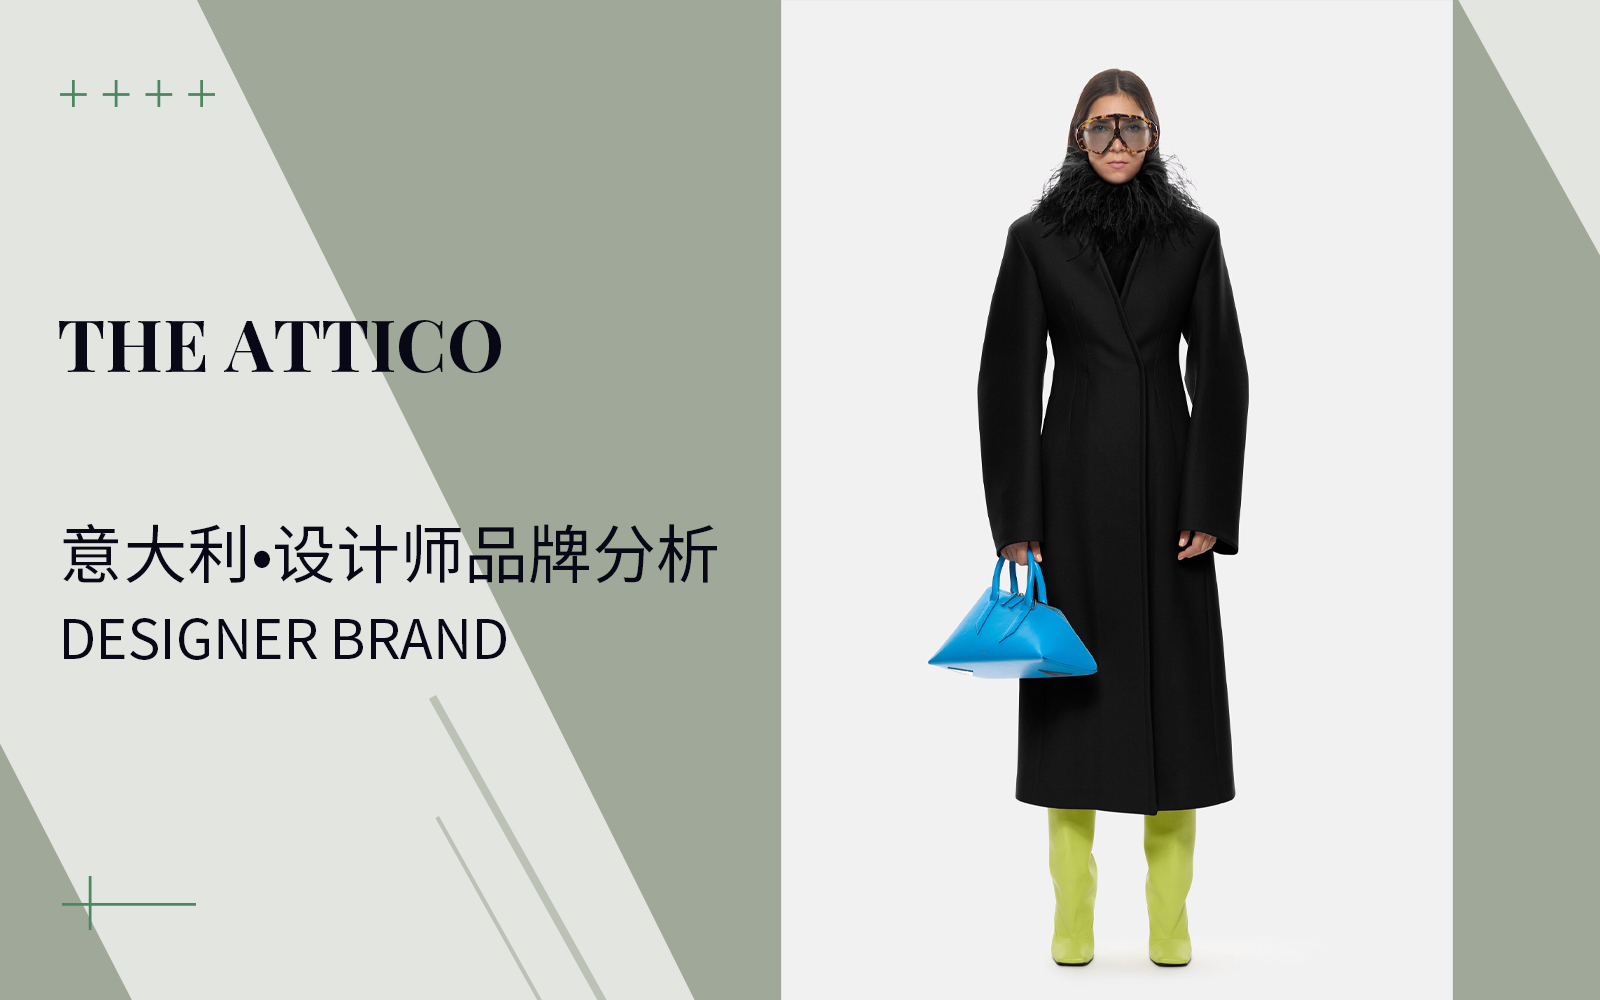 Multifaceted -- The Analysis of The Attico The Womenswear Designer Brand